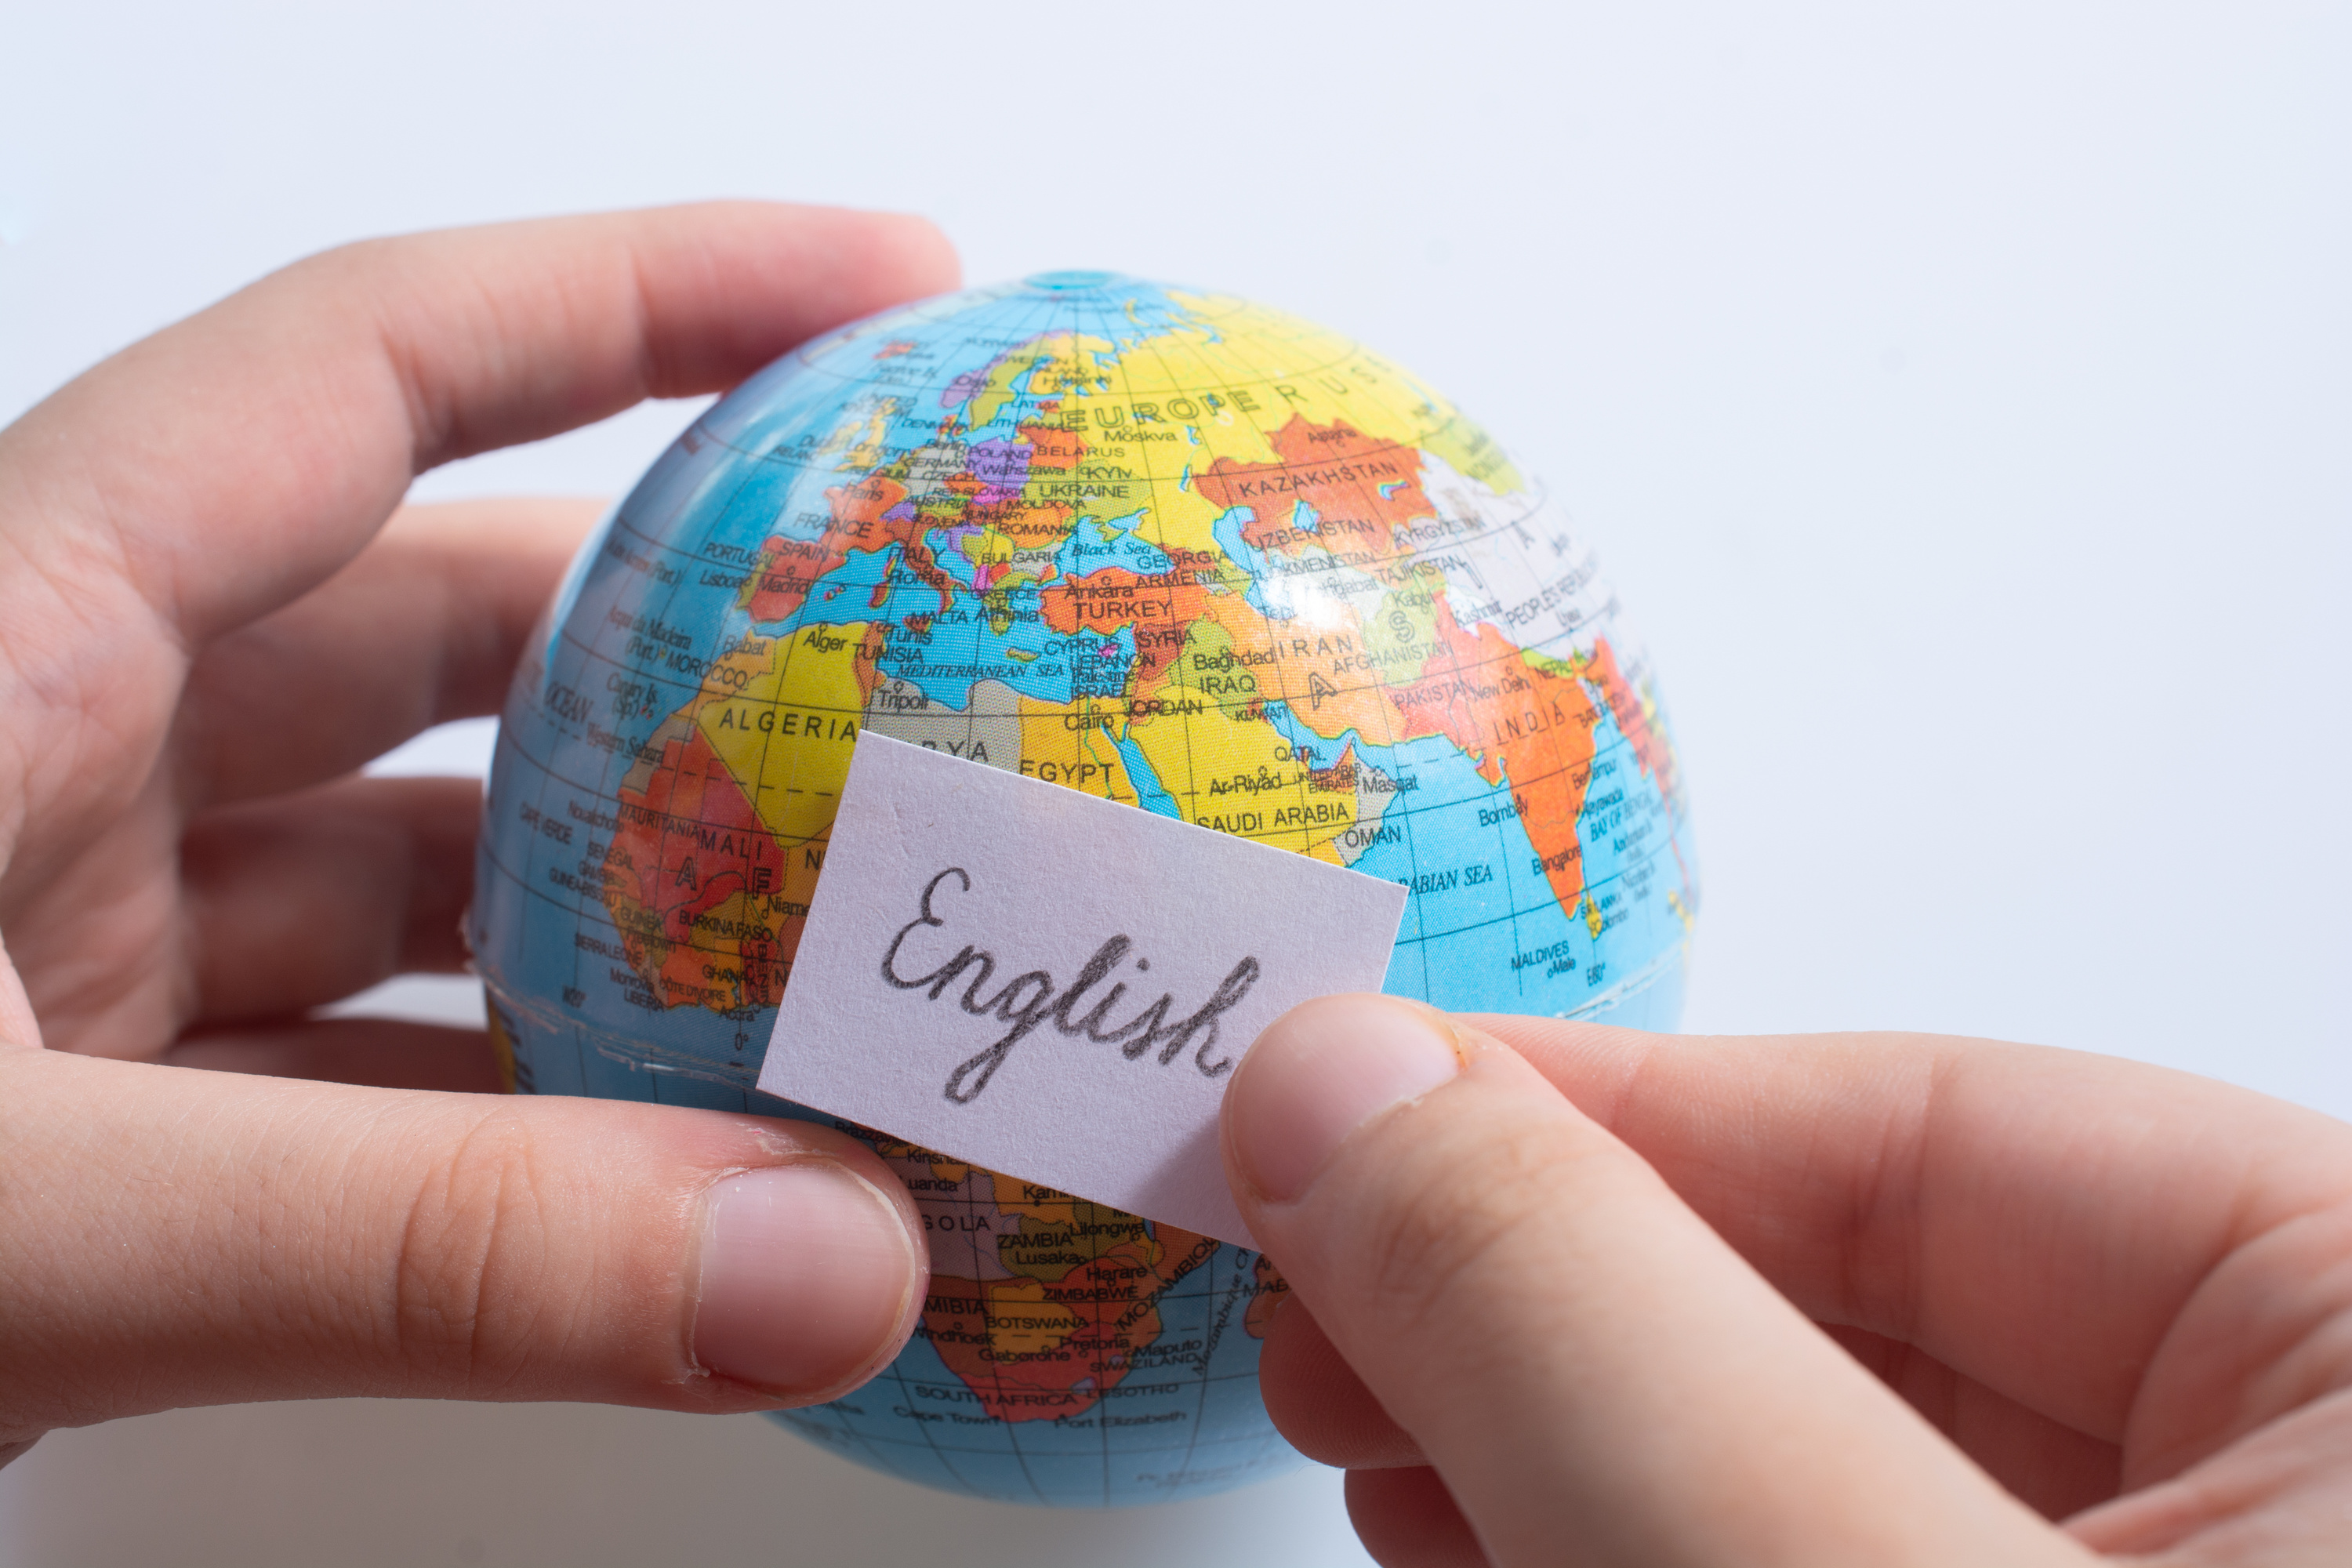 Hand Holding Notepaper with English Wording on Globe